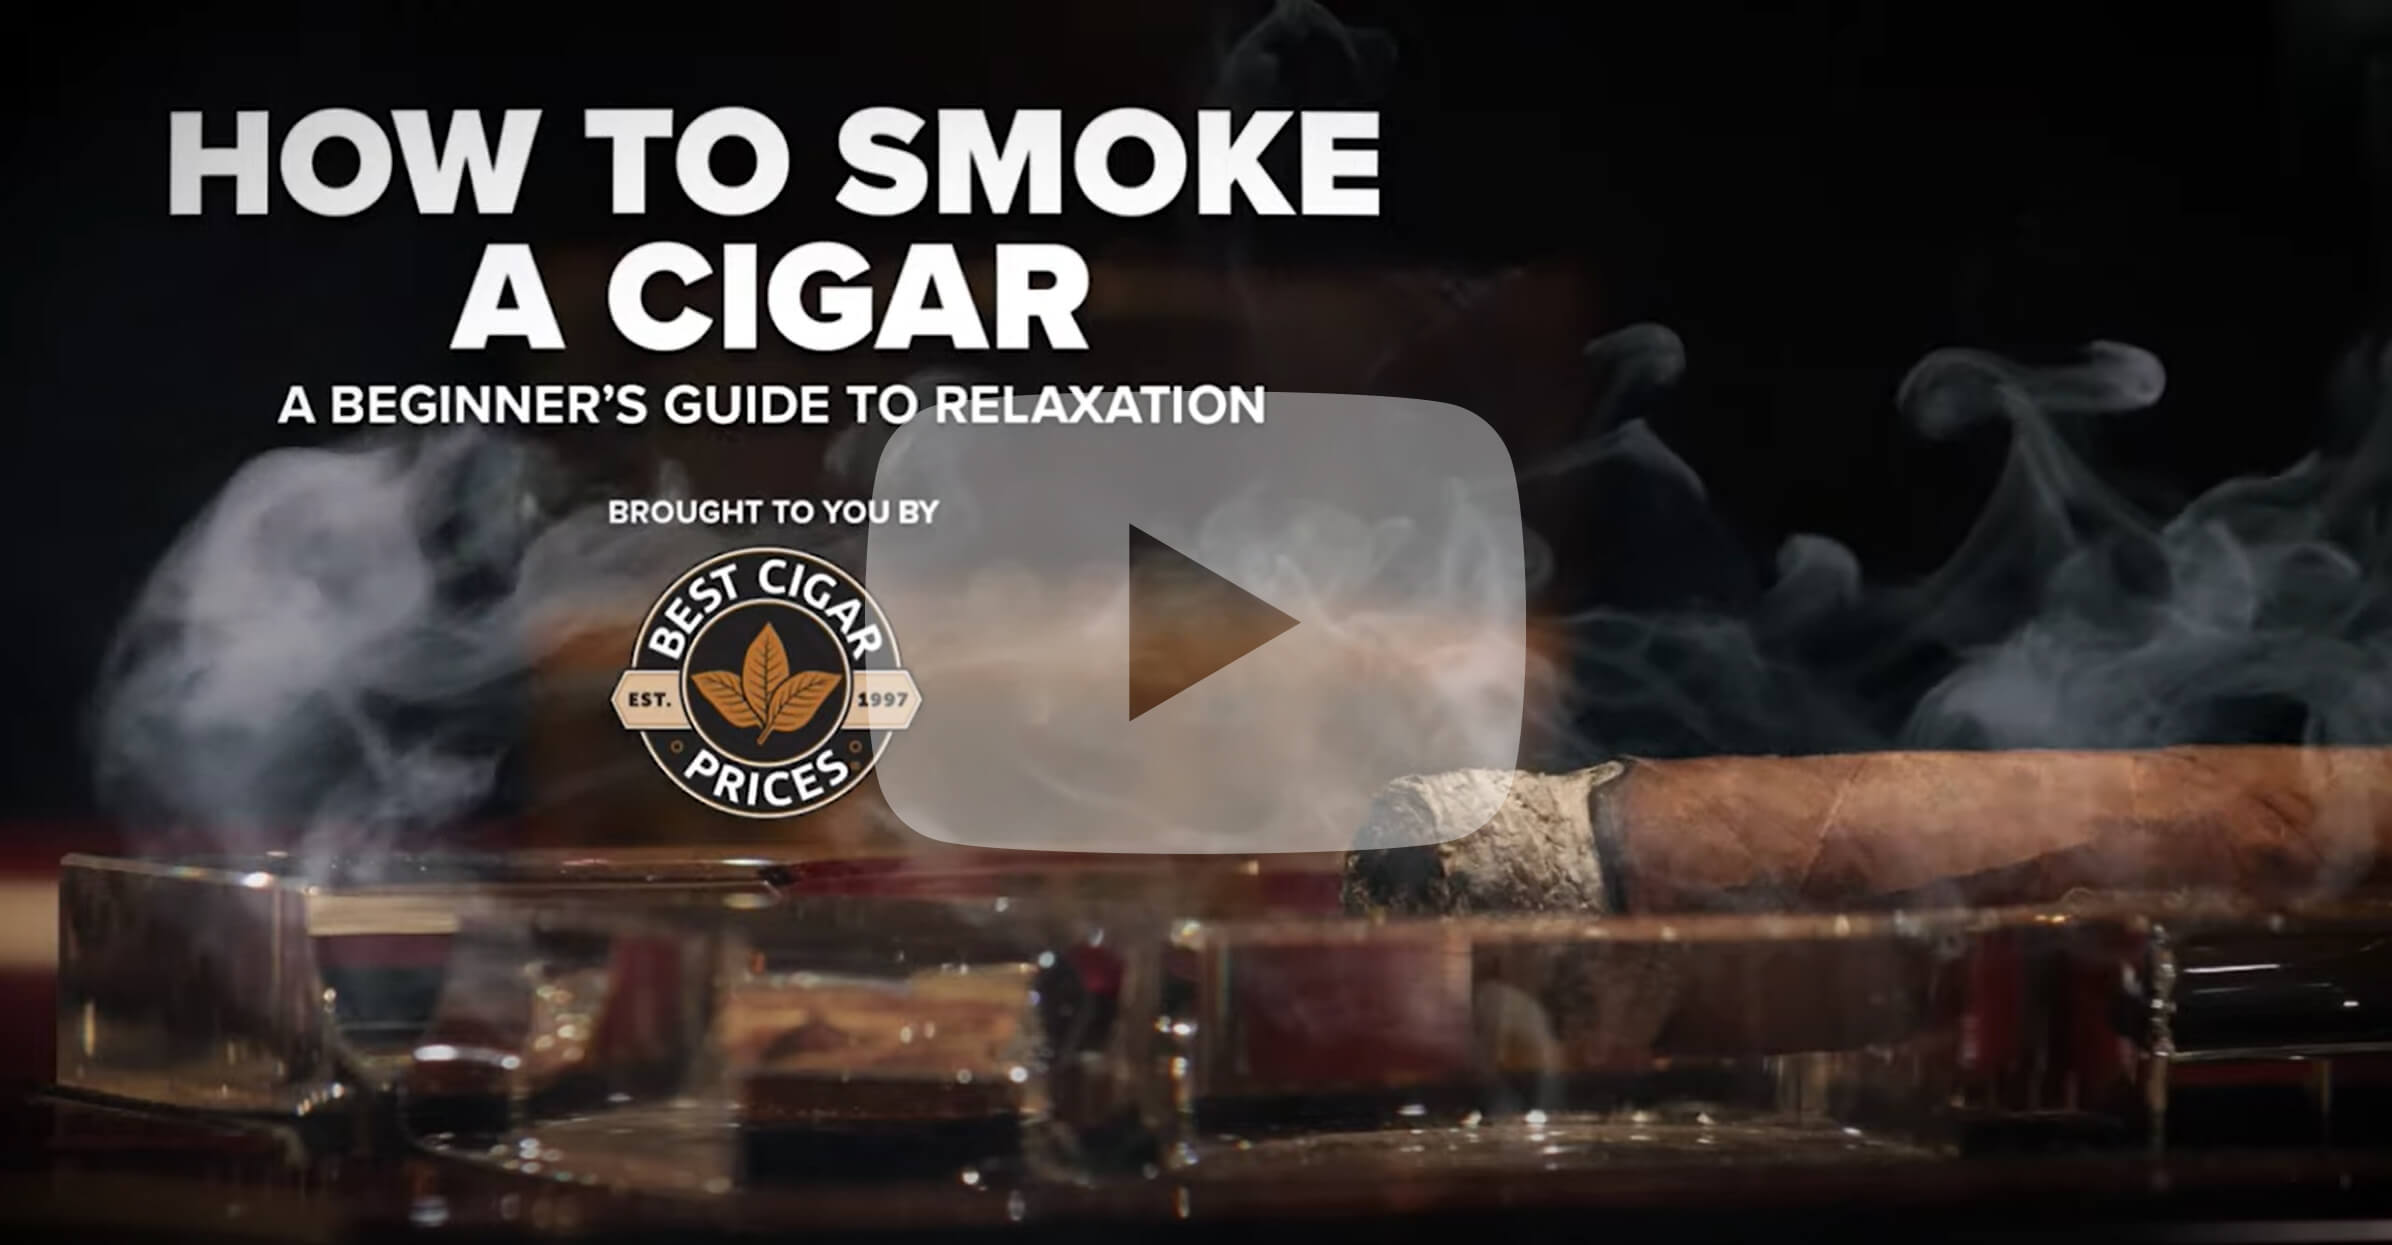 How to smoke a cigar - A beginner's guide to relaxation HOW TO SMOKE A CIGAR A BEGINNER'S GUIDE T 